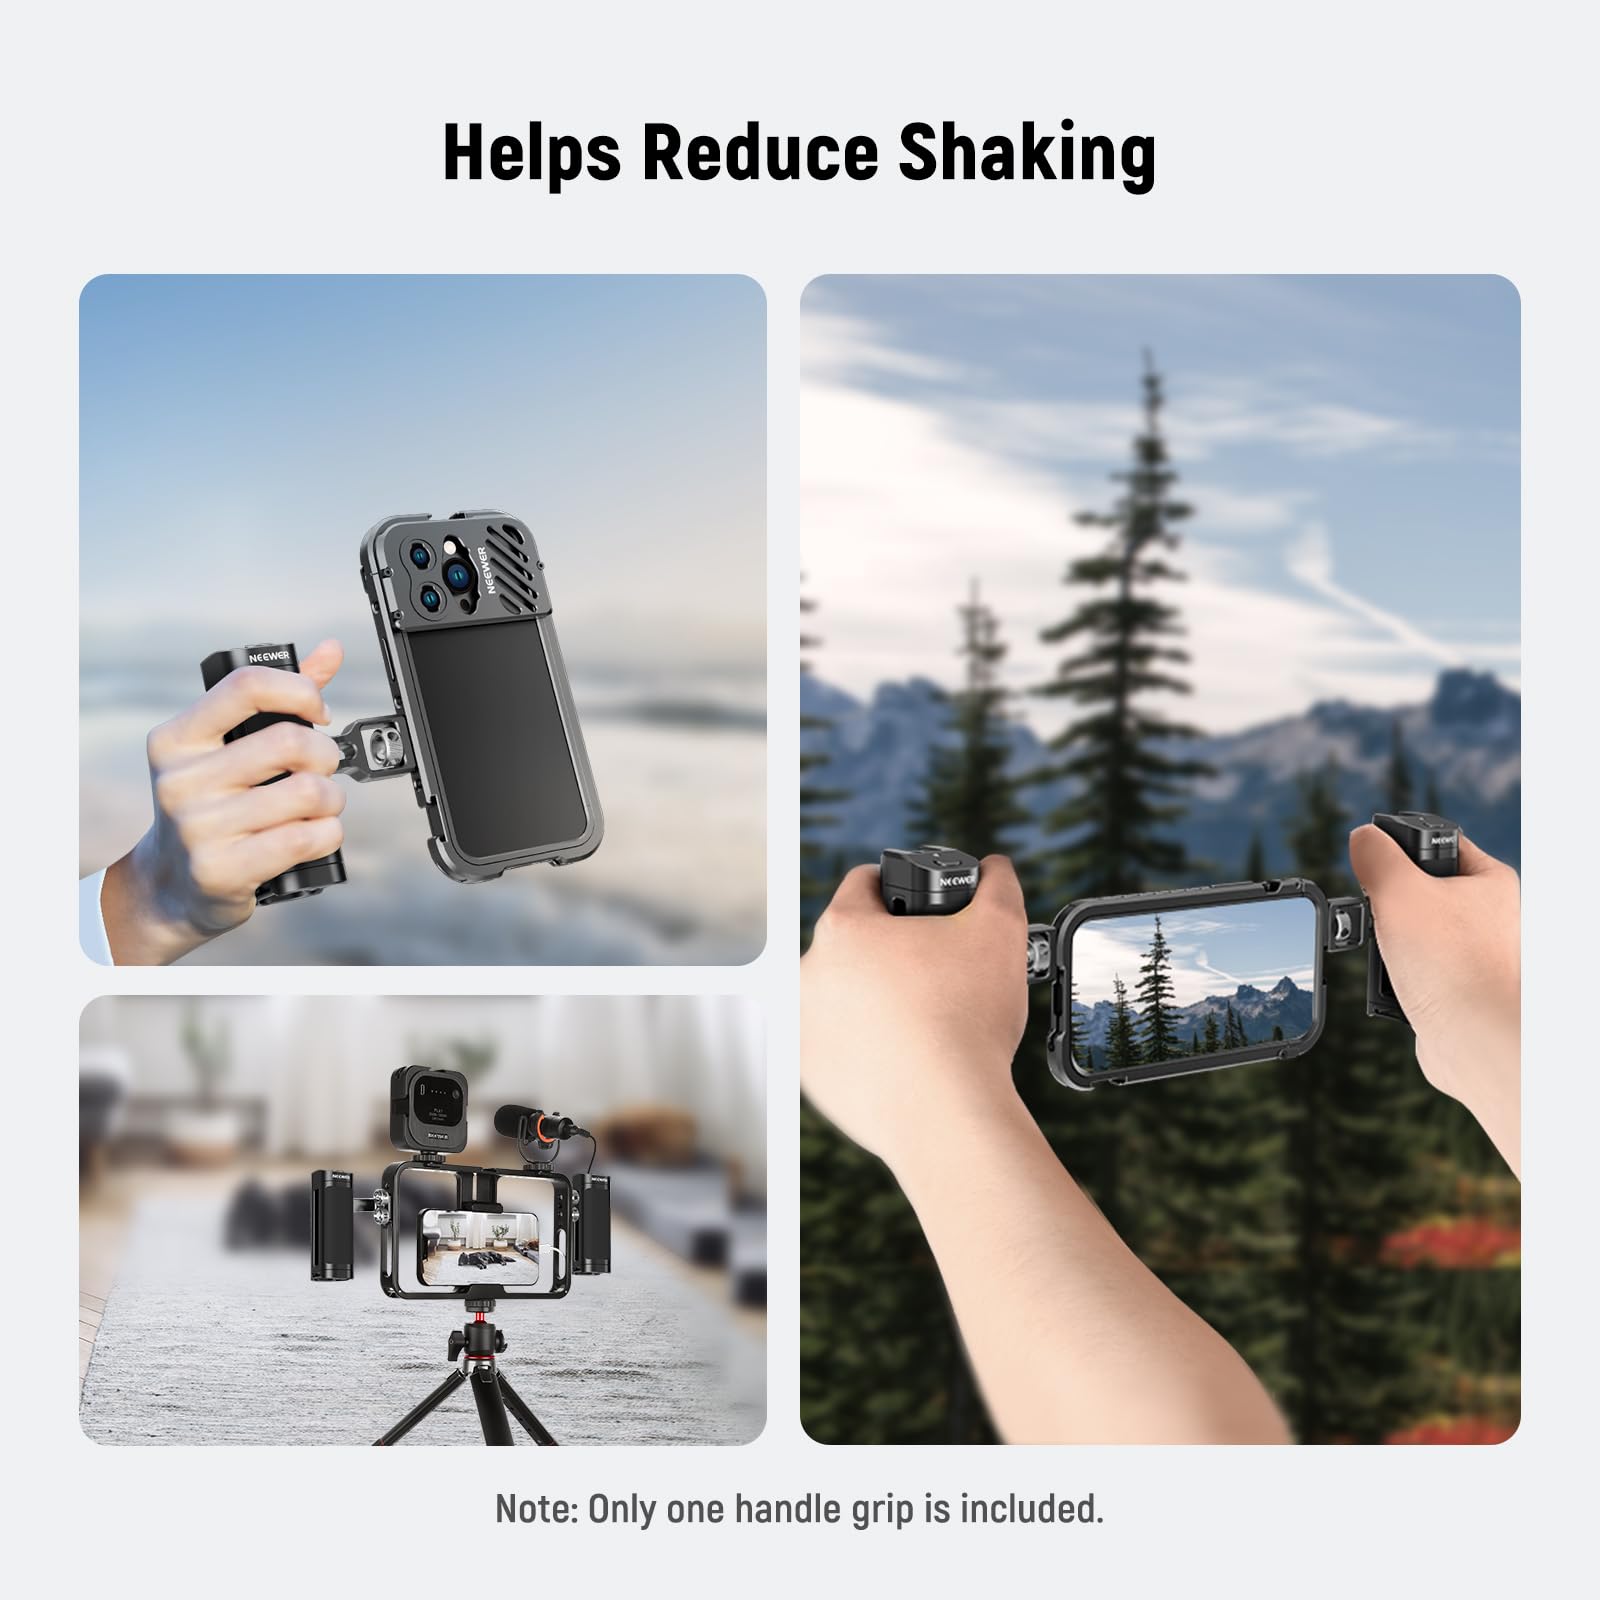 NEEWER Side Handle Grip with Wireless Remote Control Button Shutter Trigger for Smartphone Cage Video Rig, 2 Mount Adapters with 1/4